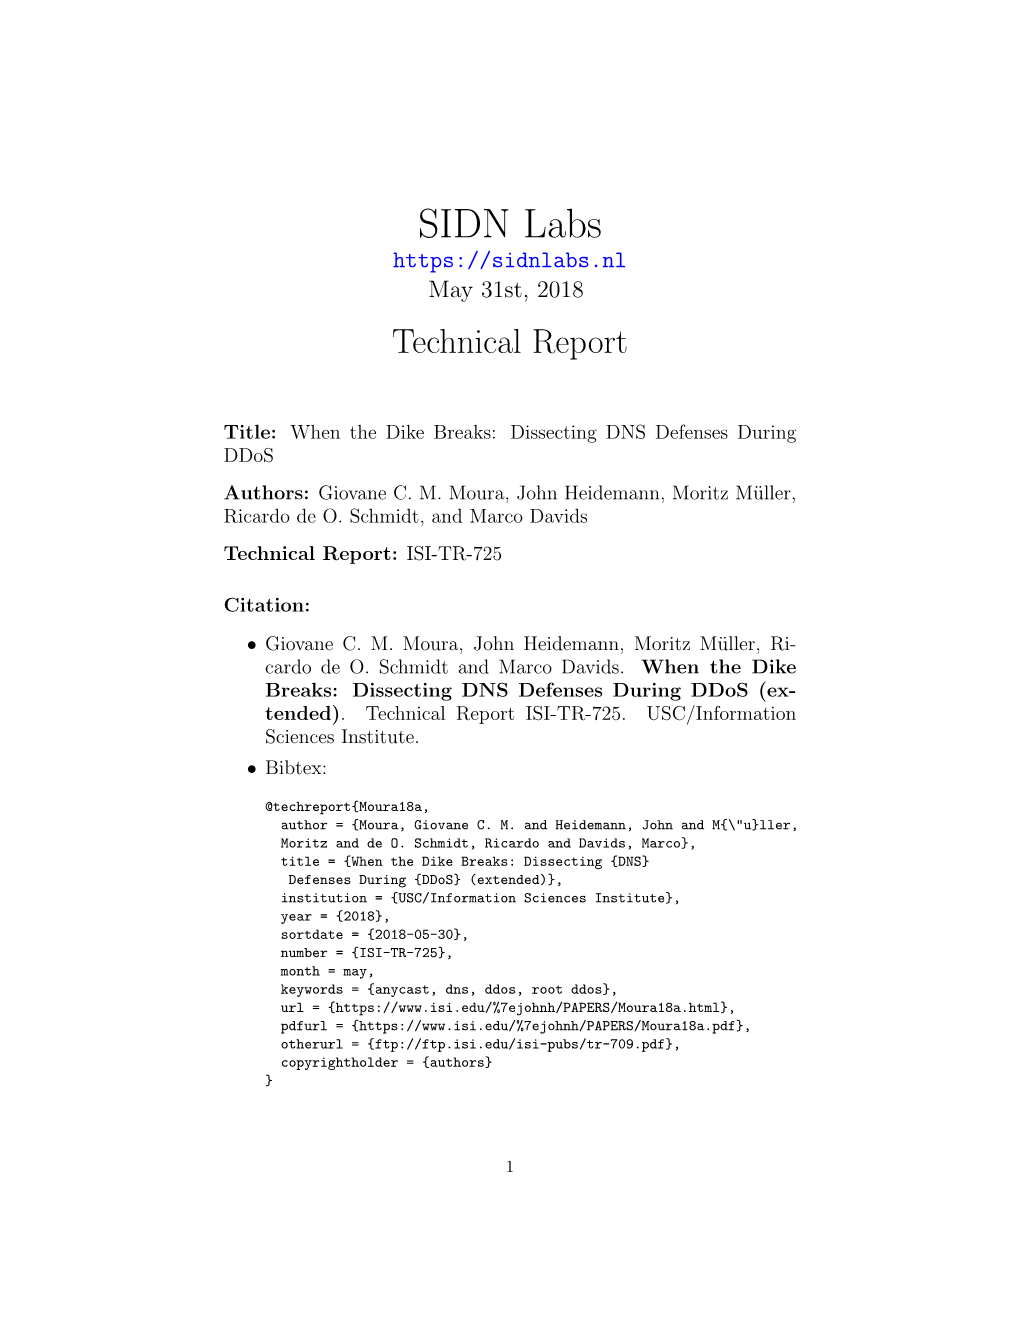 SIDN Labs May 31St, 2018 Technical Report